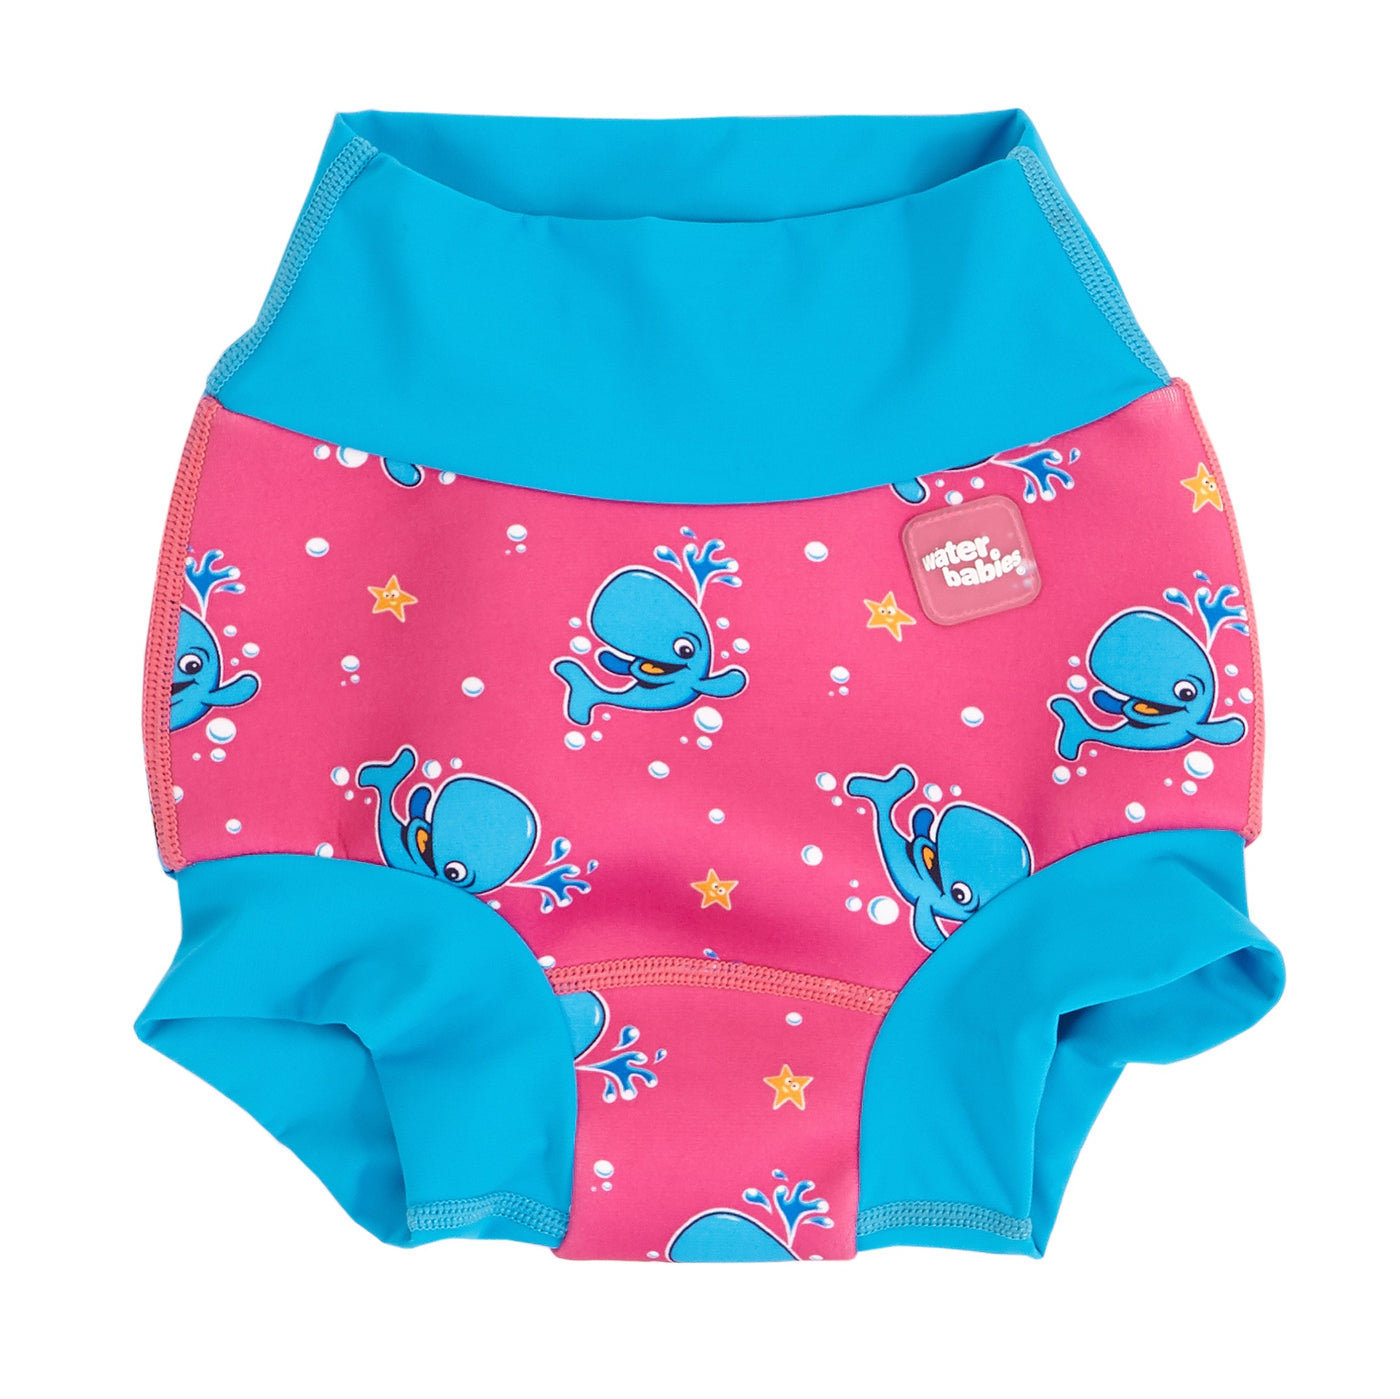 Baby swim nappy in blue and pink Bubba the Whale print